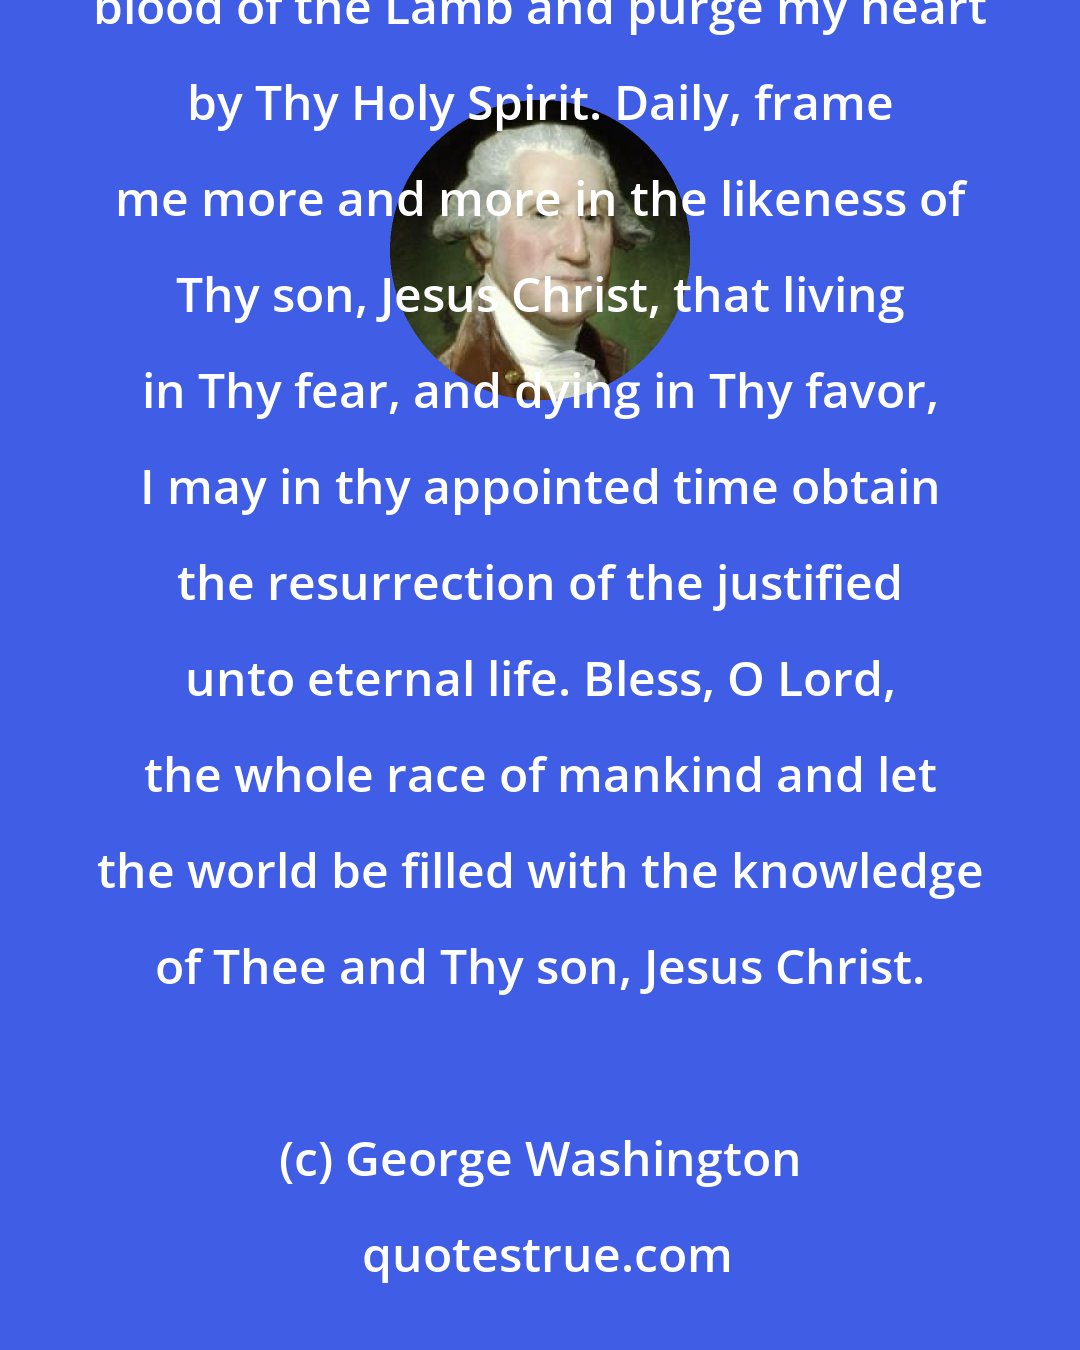 George Washington: Oh, eternal and everlasting God, direct my thoughts, words and work. Wash away my sins in the immaculate blood of the Lamb and purge my heart by Thy Holy Spirit. Daily, frame me more and more in the likeness of Thy son, Jesus Christ, that living in Thy fear, and dying in Thy favor, I may in thy appointed time obtain the resurrection of the justified unto eternal life. Bless, O Lord, the whole race of mankind and let the world be filled with the knowledge of Thee and Thy son, Jesus Christ.